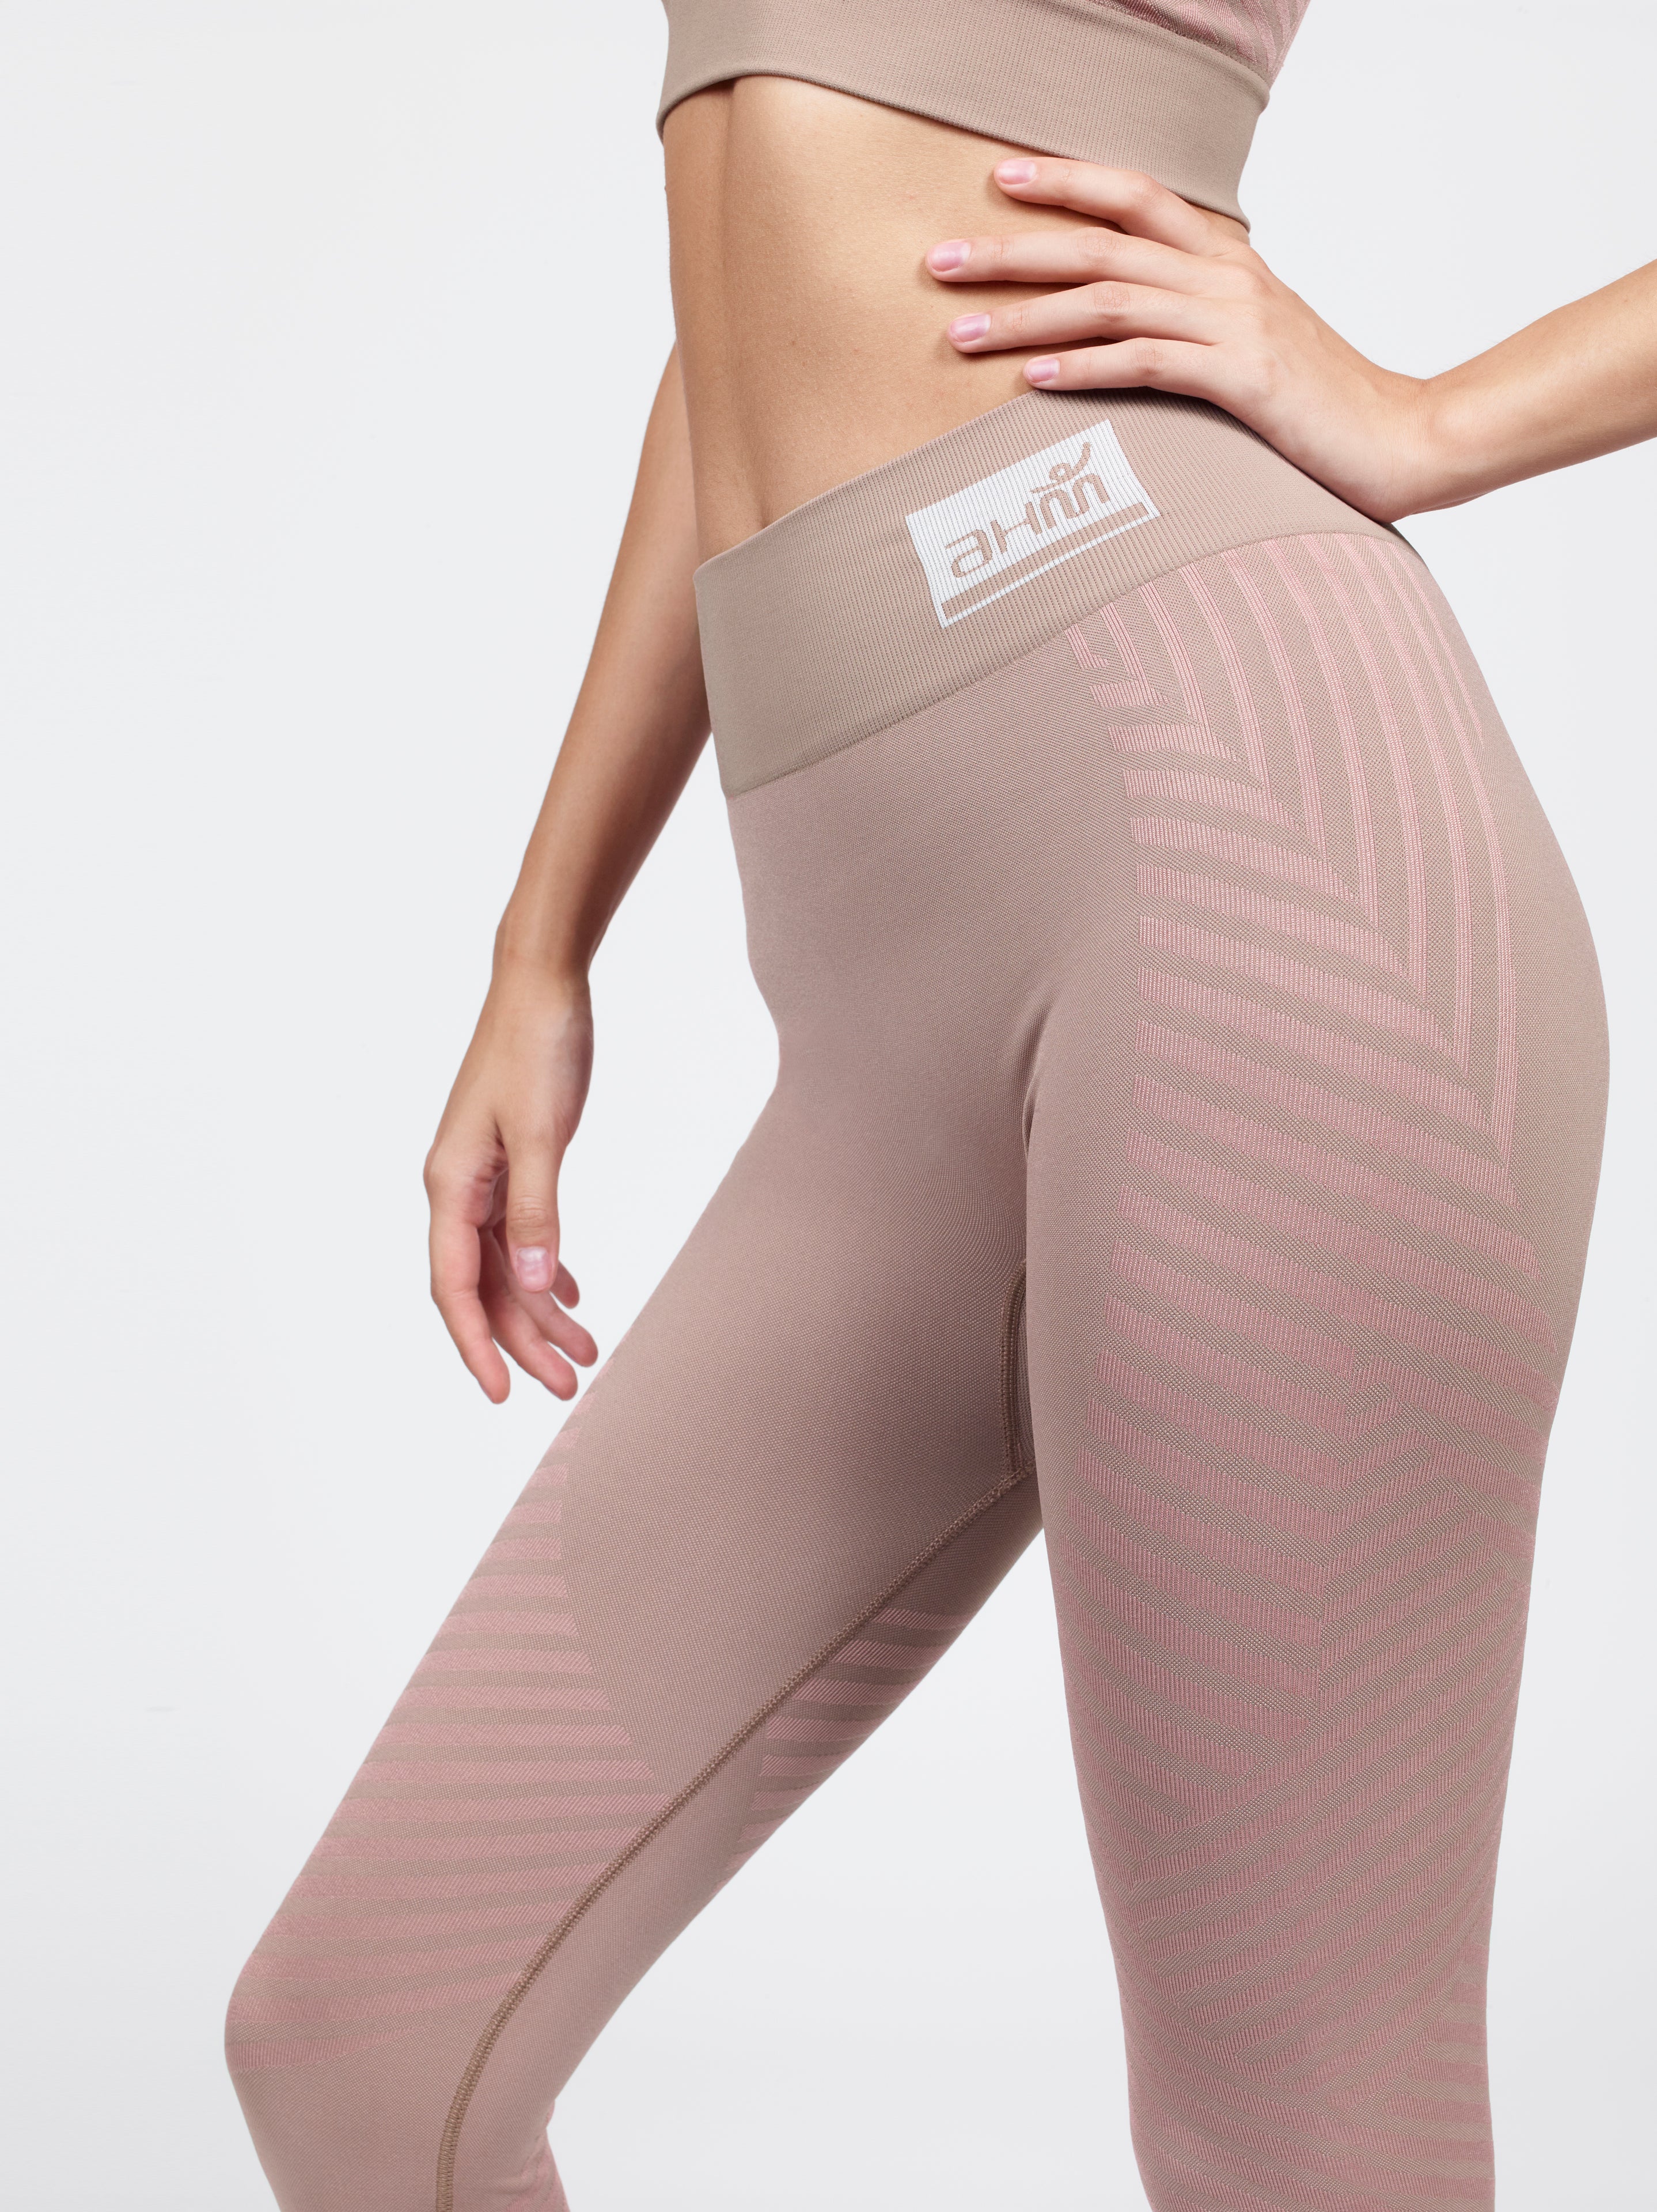 Compression Leggings – Awakened Heart and Mind